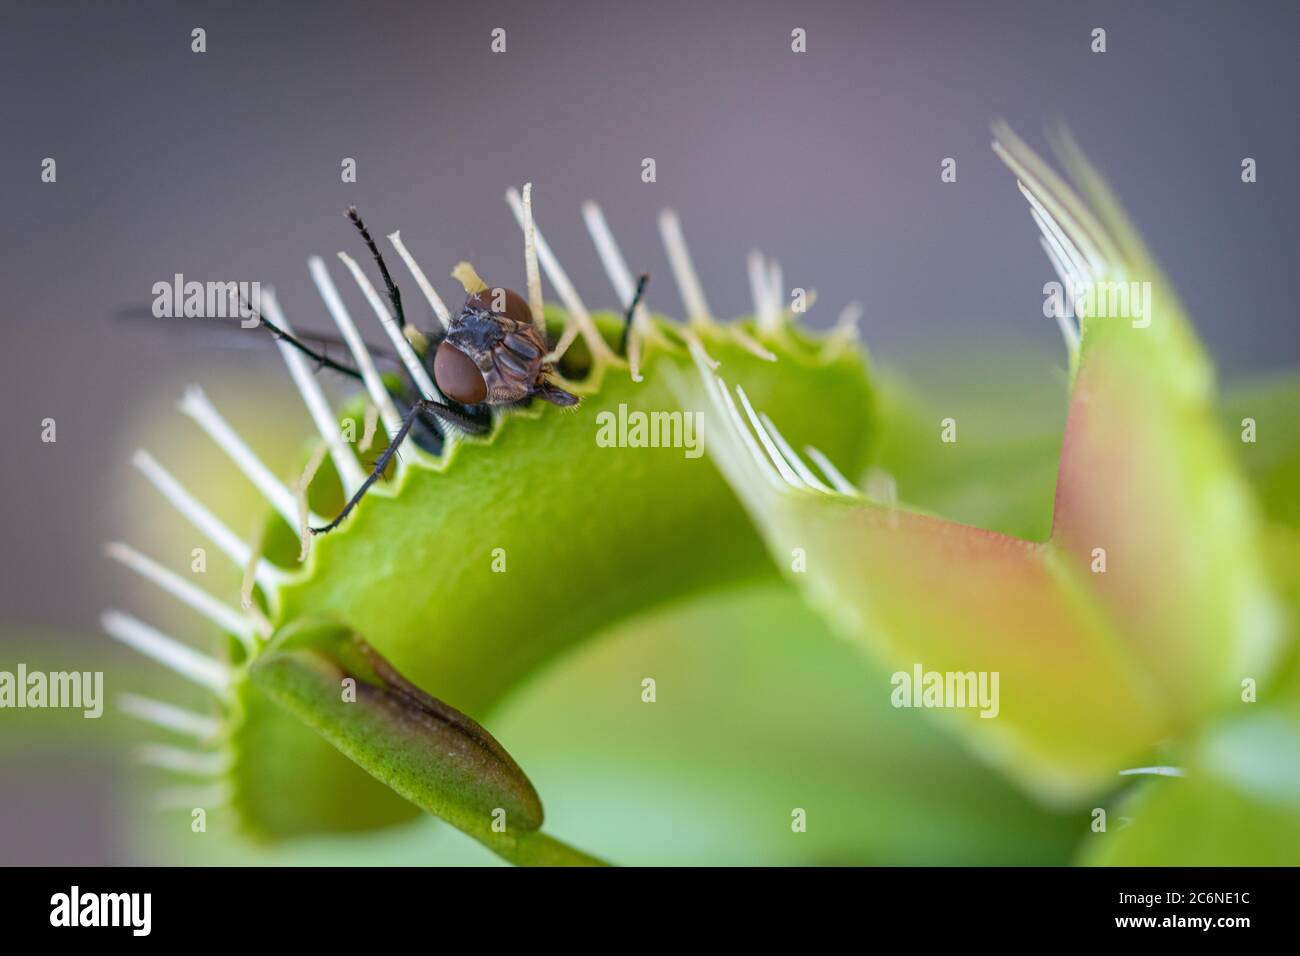 a close up image of a common green bottle fly trapped inside a venus flytrap Stock Photo